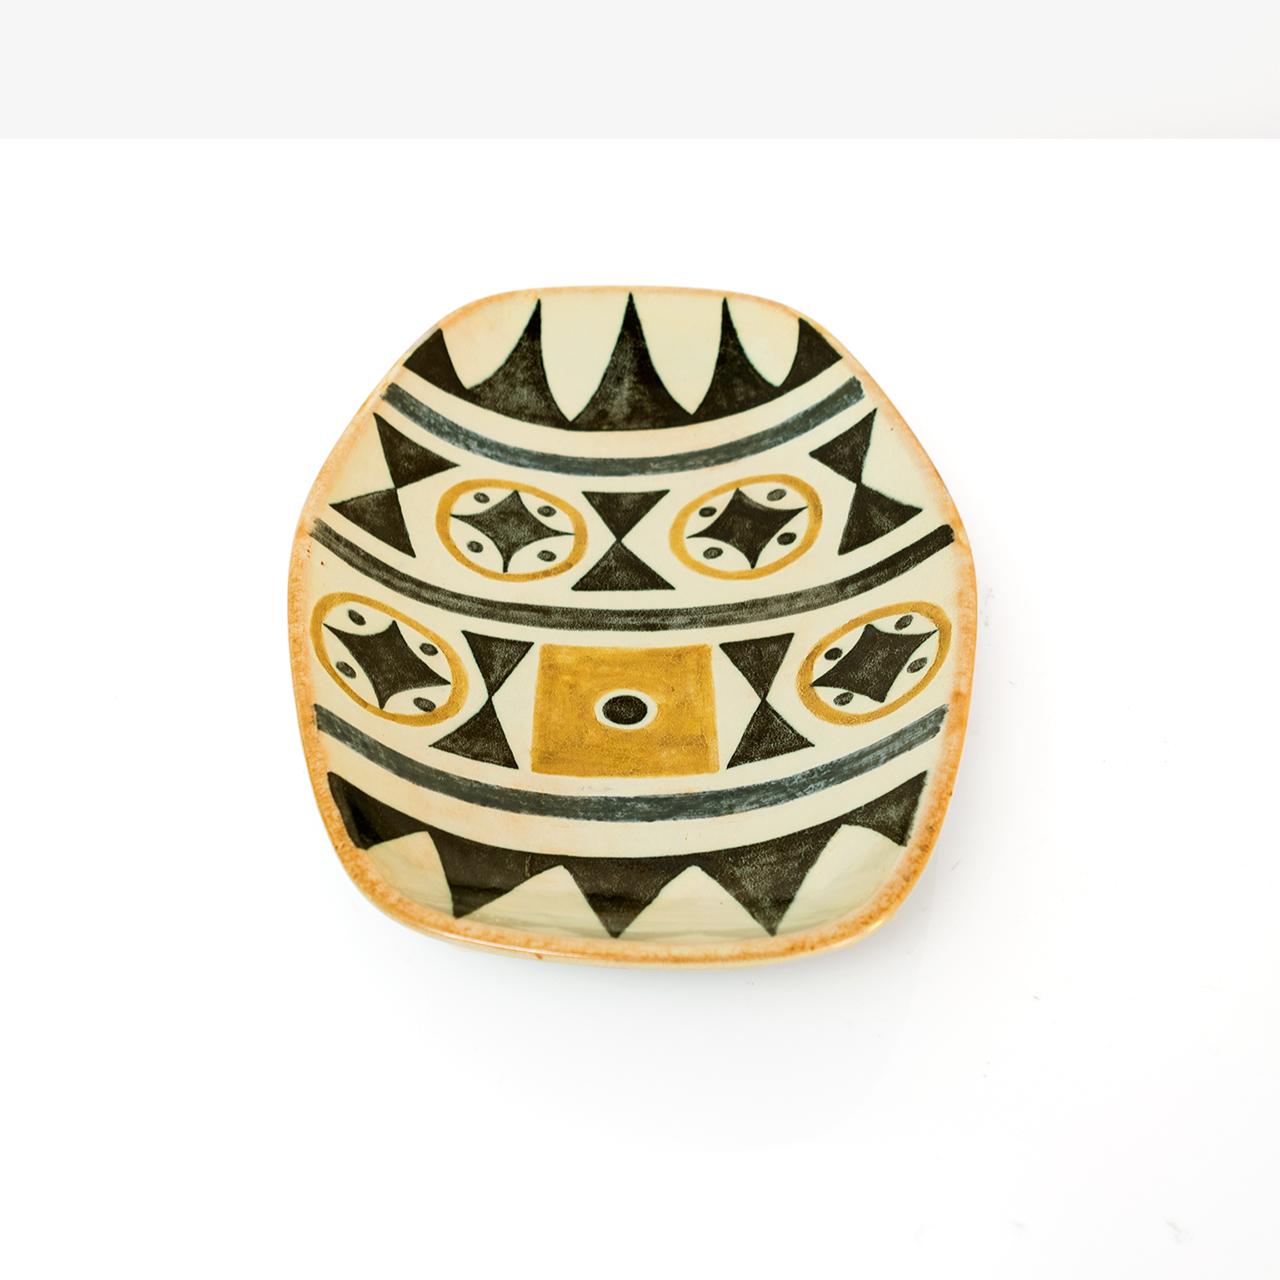 A Scandinavian Modern ceramic dish with hand decorated geometric patterns. This dish is from a collaboration series by Carl Harry Stålhane and Aune Laukkanen for Rörstrand, circa 1950s. 

Measures: Length 14.75“, width 9.25“, height 2“.